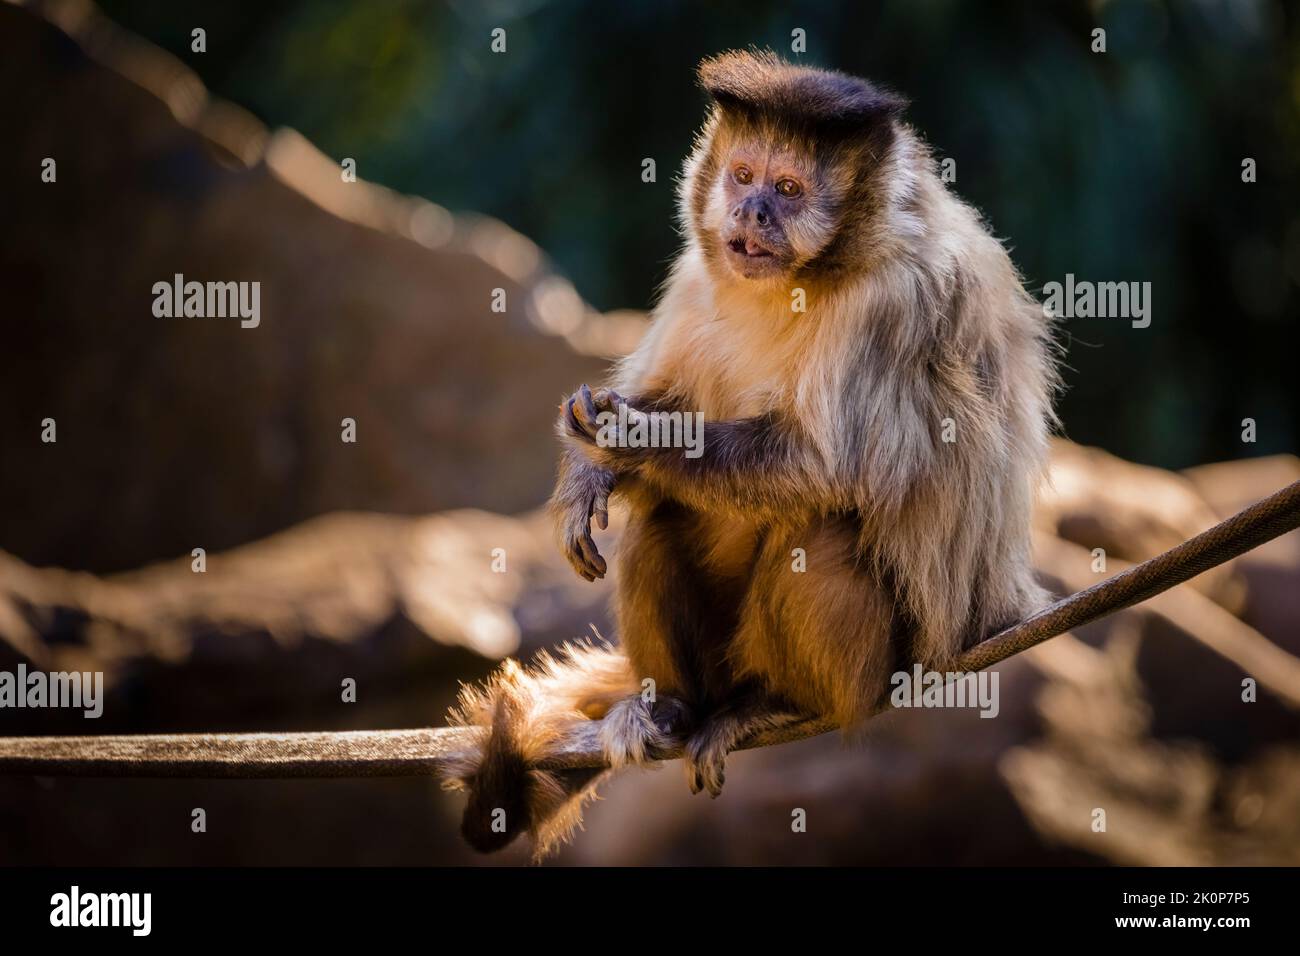 Monkey sit down looking with food on his hand, Pantanal, Brazil Stock Photo